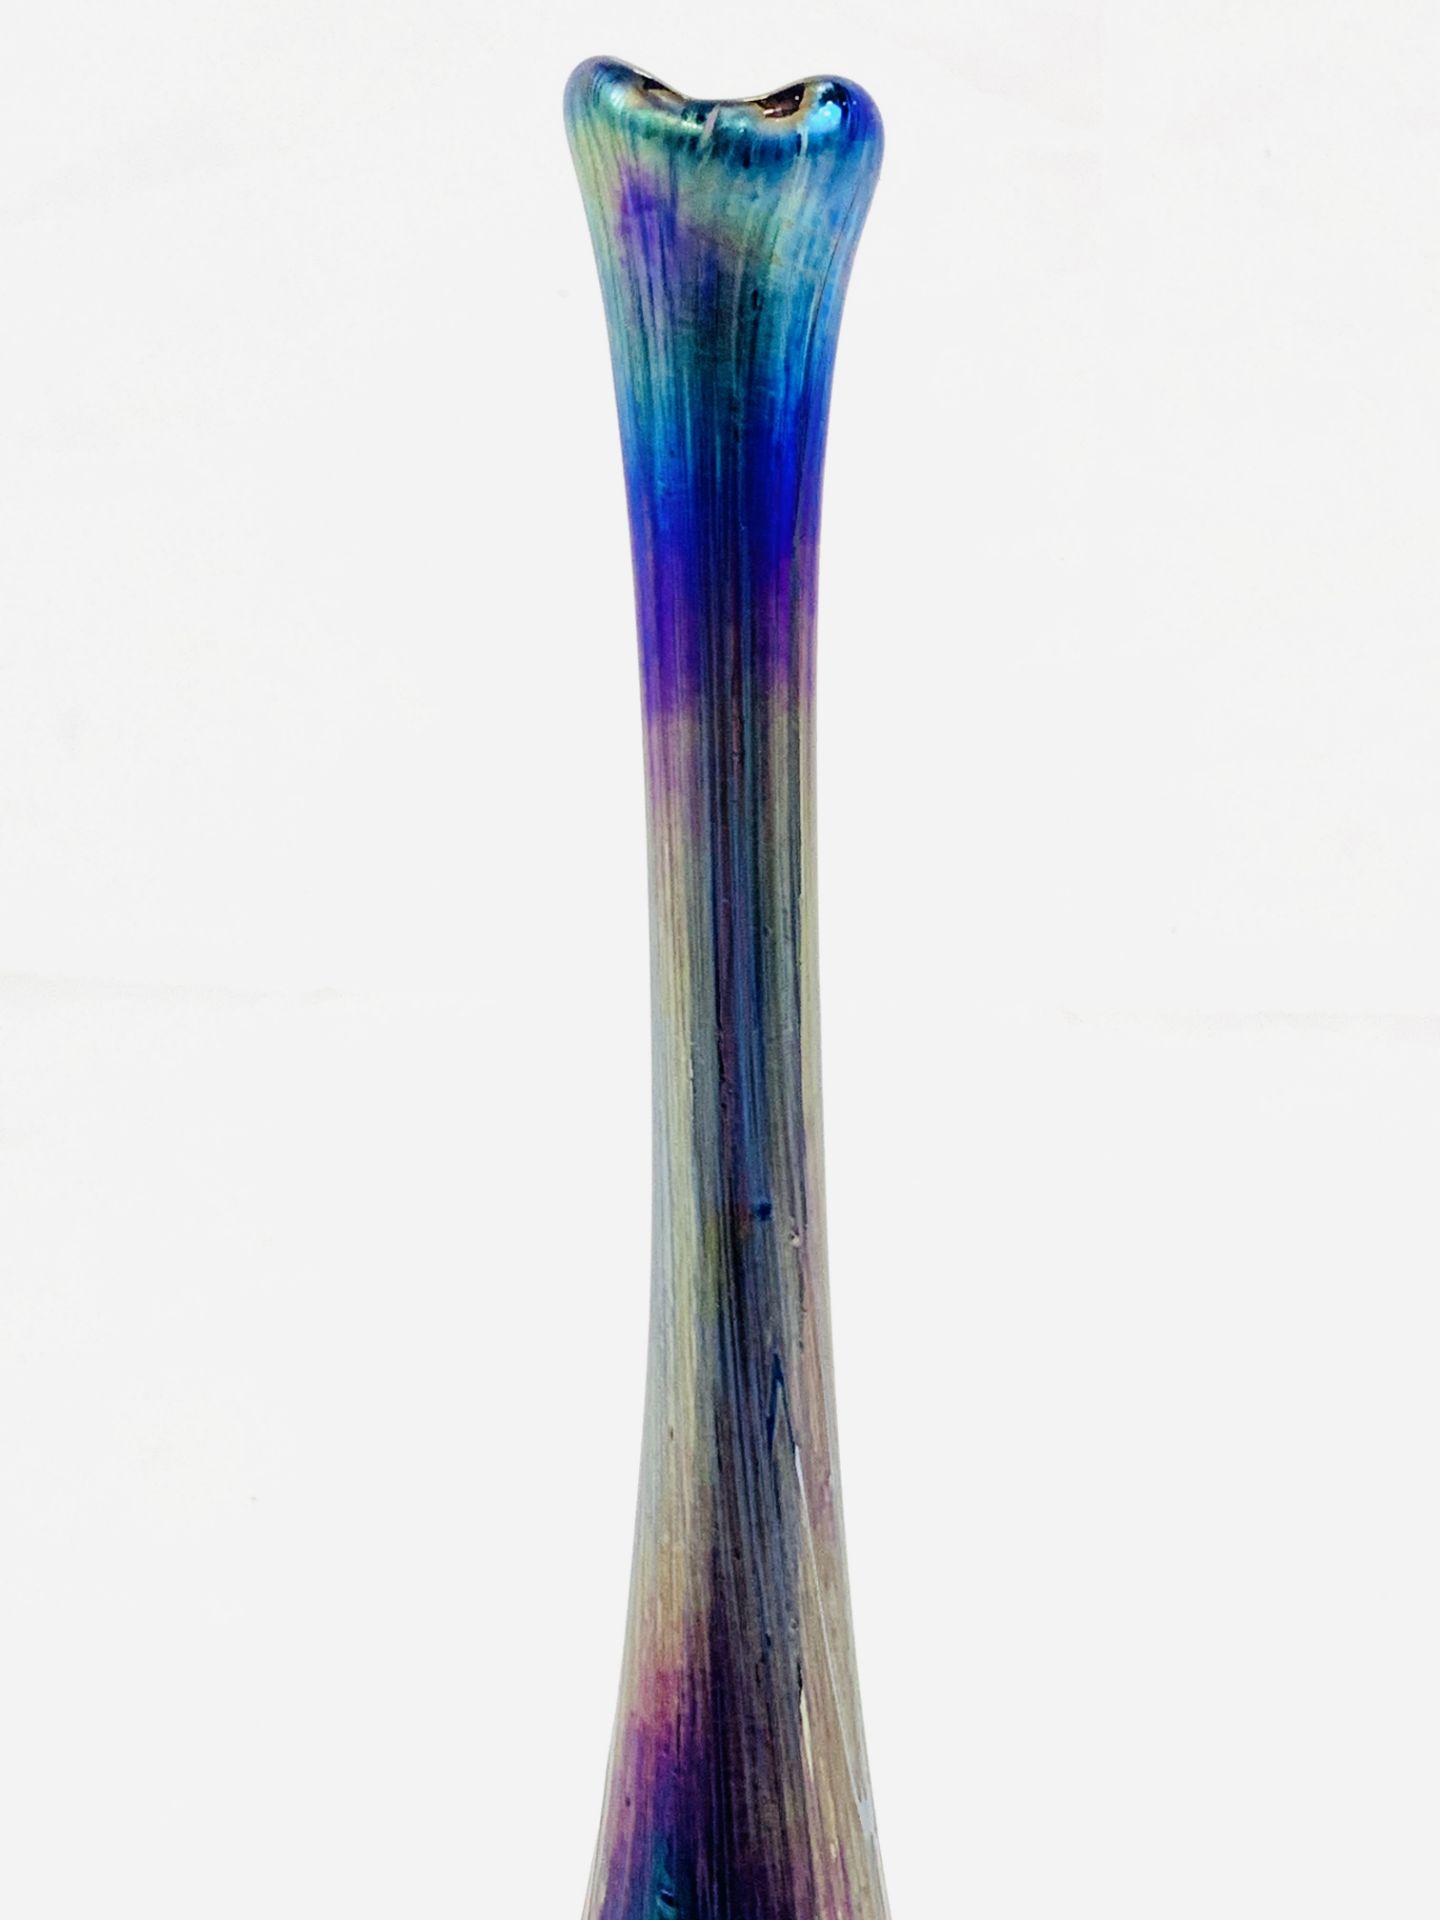 Tall bud vase by Glasform, signed J Ditchfield - Image 3 of 3